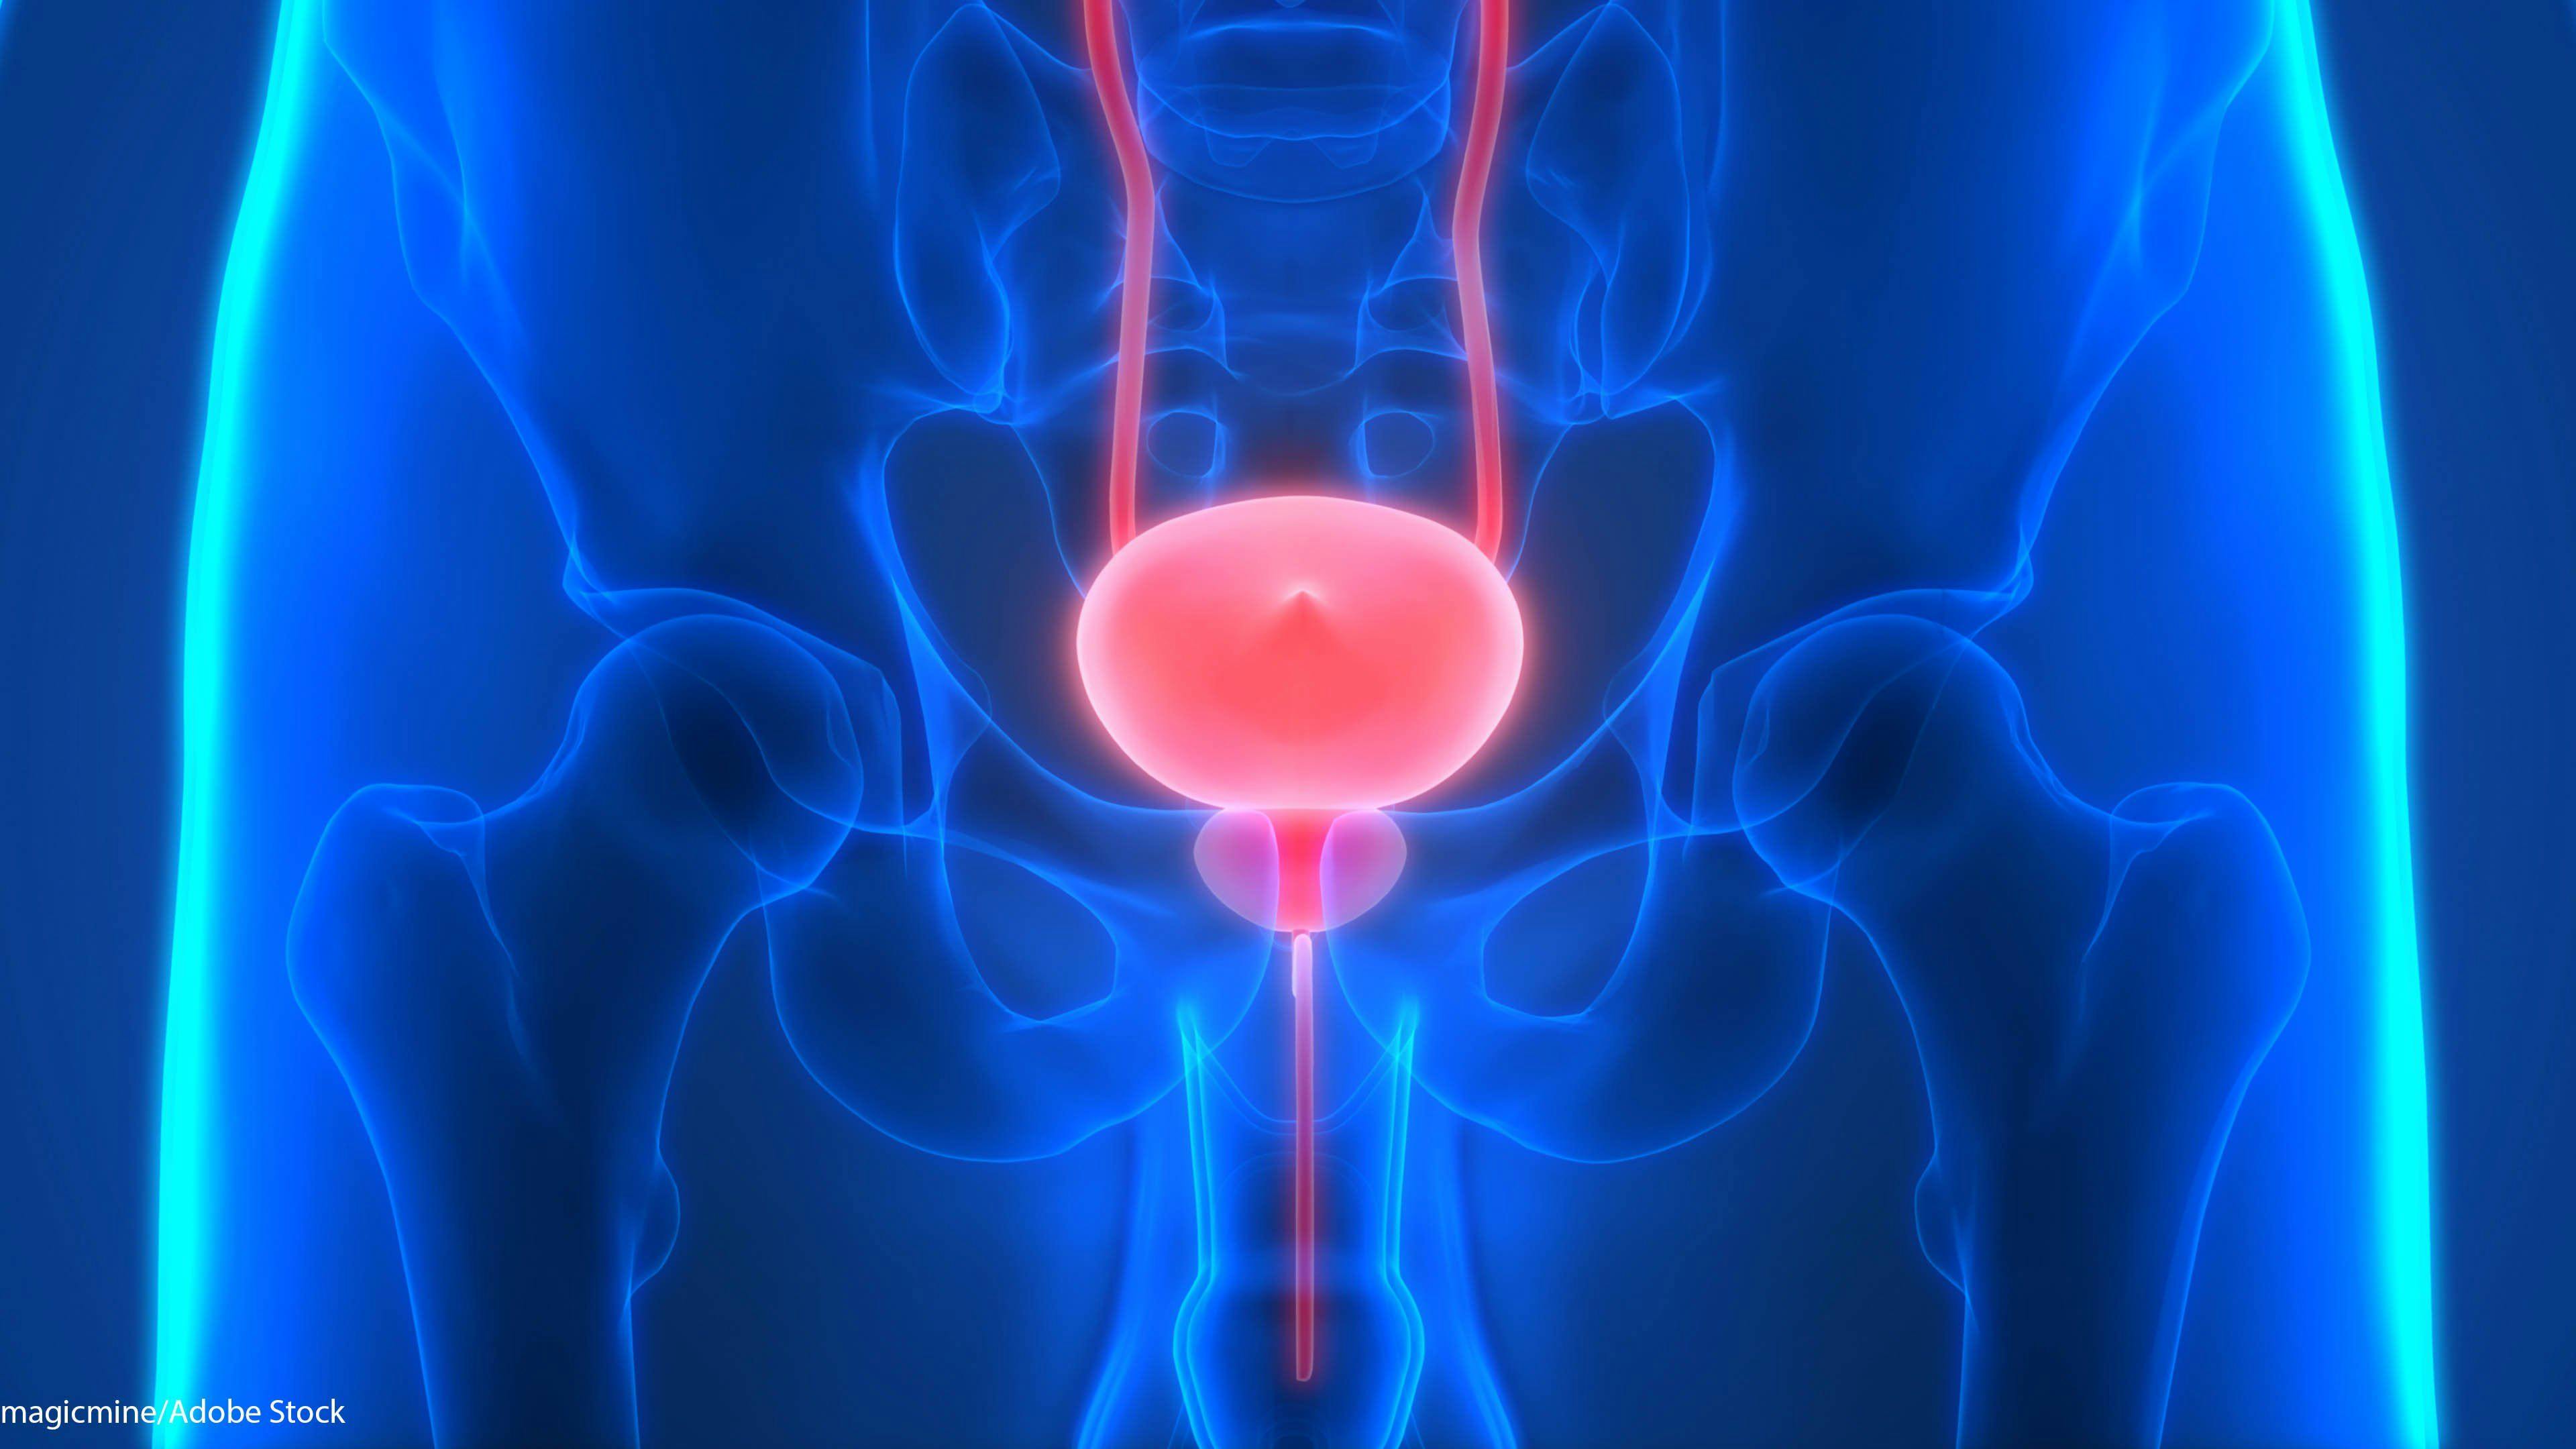 Stress Urinary Incontinence Post-Prostatectomy May Lead to Pelvic Floor Overactivity